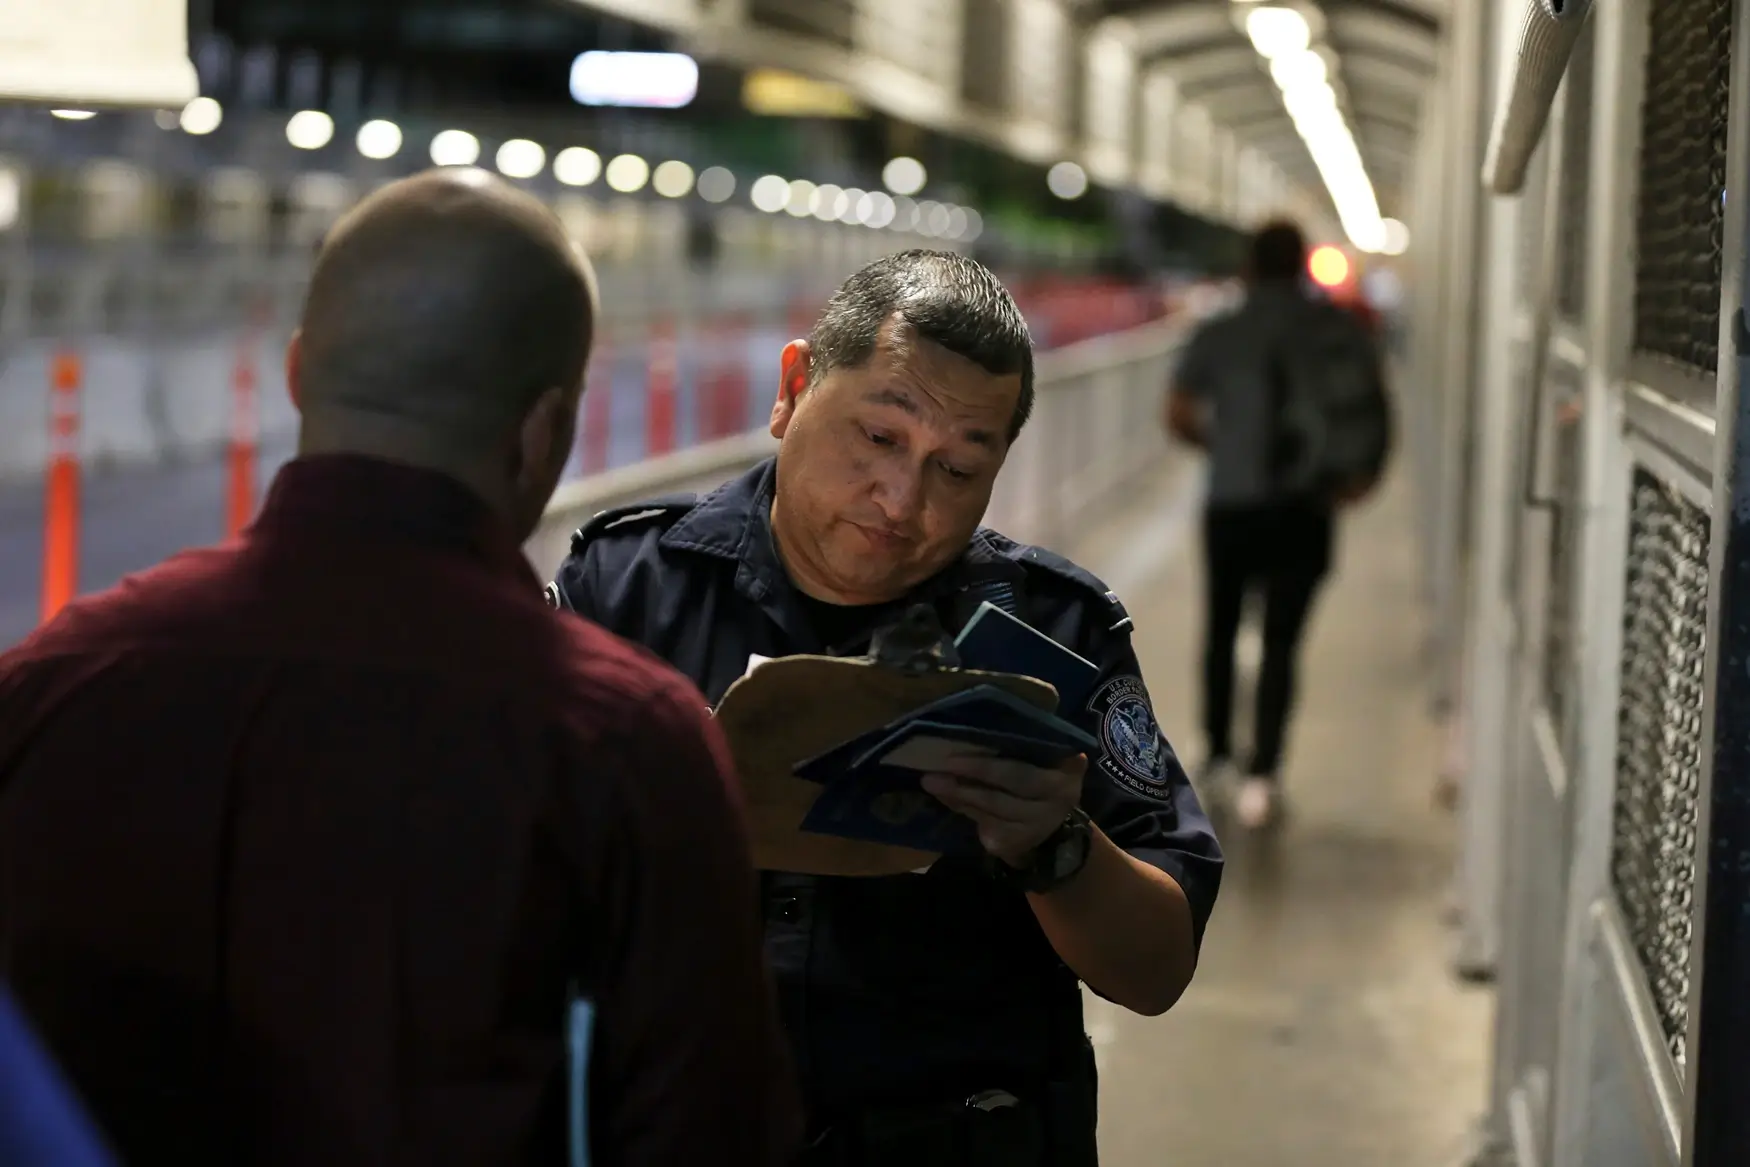 A U.S. Customs and Border Protection officer checks the documents of migrants who are on their way to apply for asylum in the United States, on International Bridge 1 as they depart Nuevo Laredo, Mexico, early Tuesday, Sept. 17, 2019. Tent courtrooms opened Monday in two Texas border cities to help process thousands of migrants who are being forced to wait in Mexico while their requests for asylum wind through clogged immigration courts.